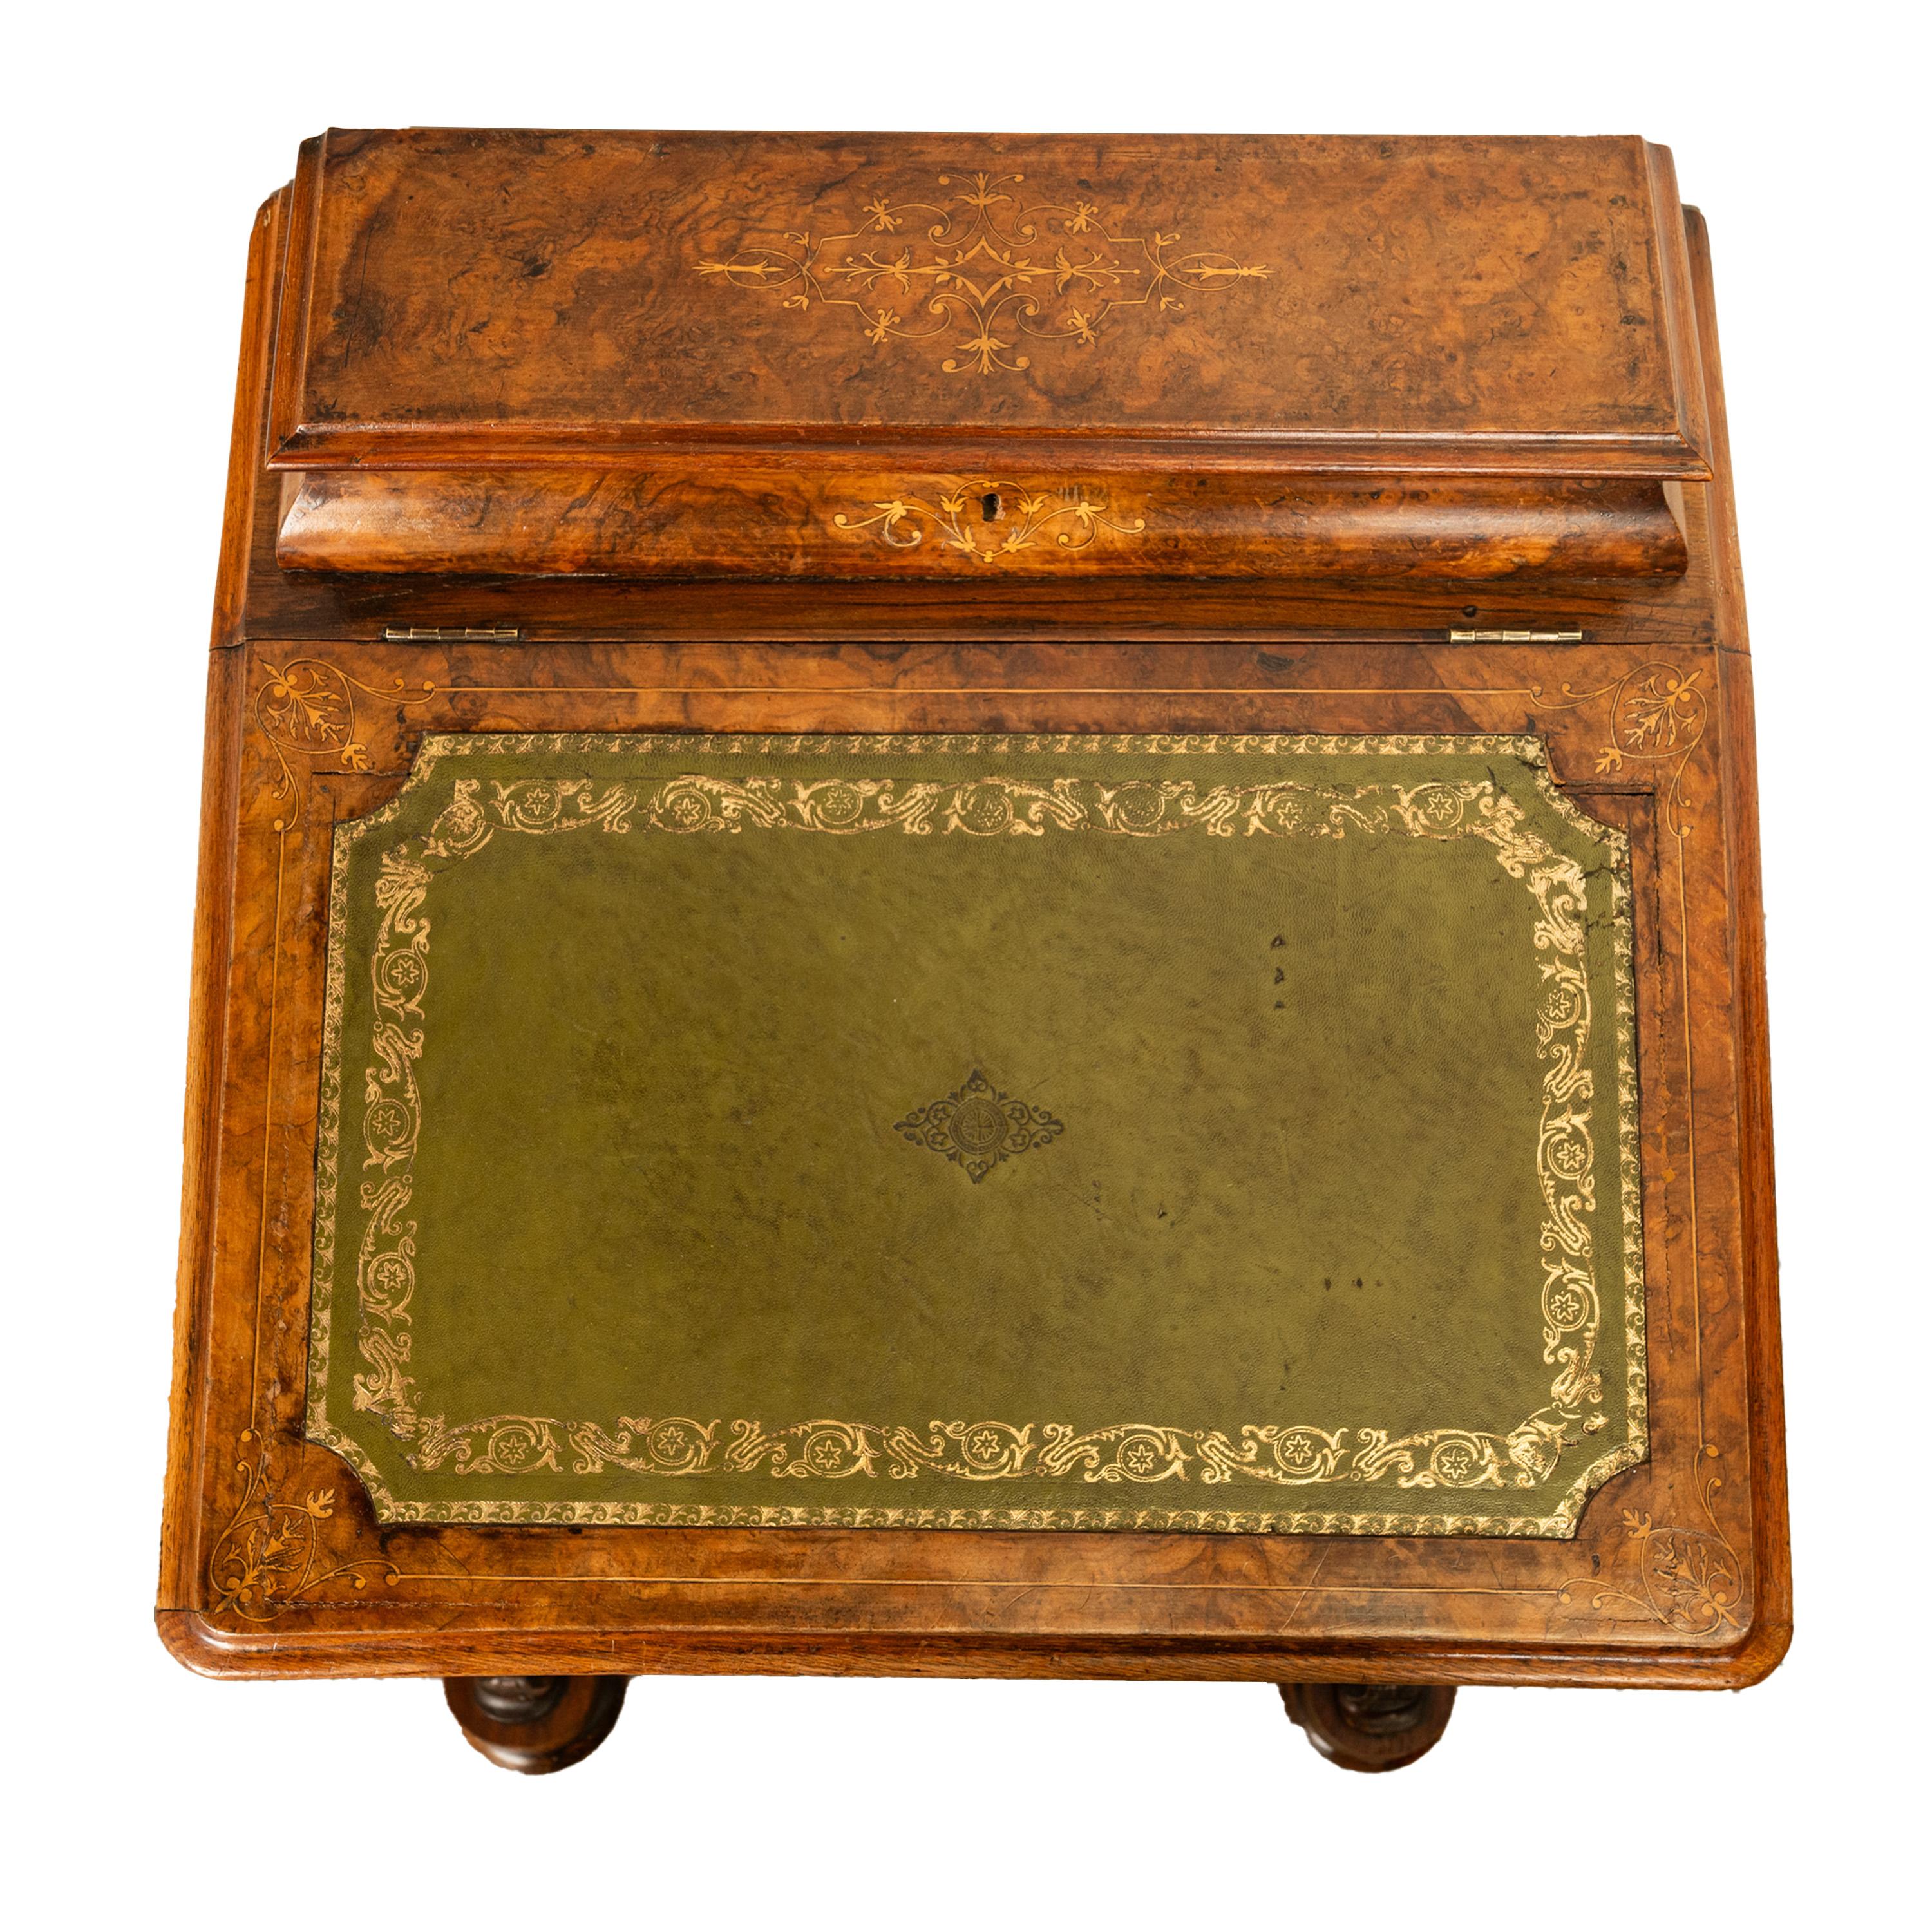 Antique Victorian Burl Walnut Inlaid Marquetry Carved Davenport Desk 1860 For Sale 14